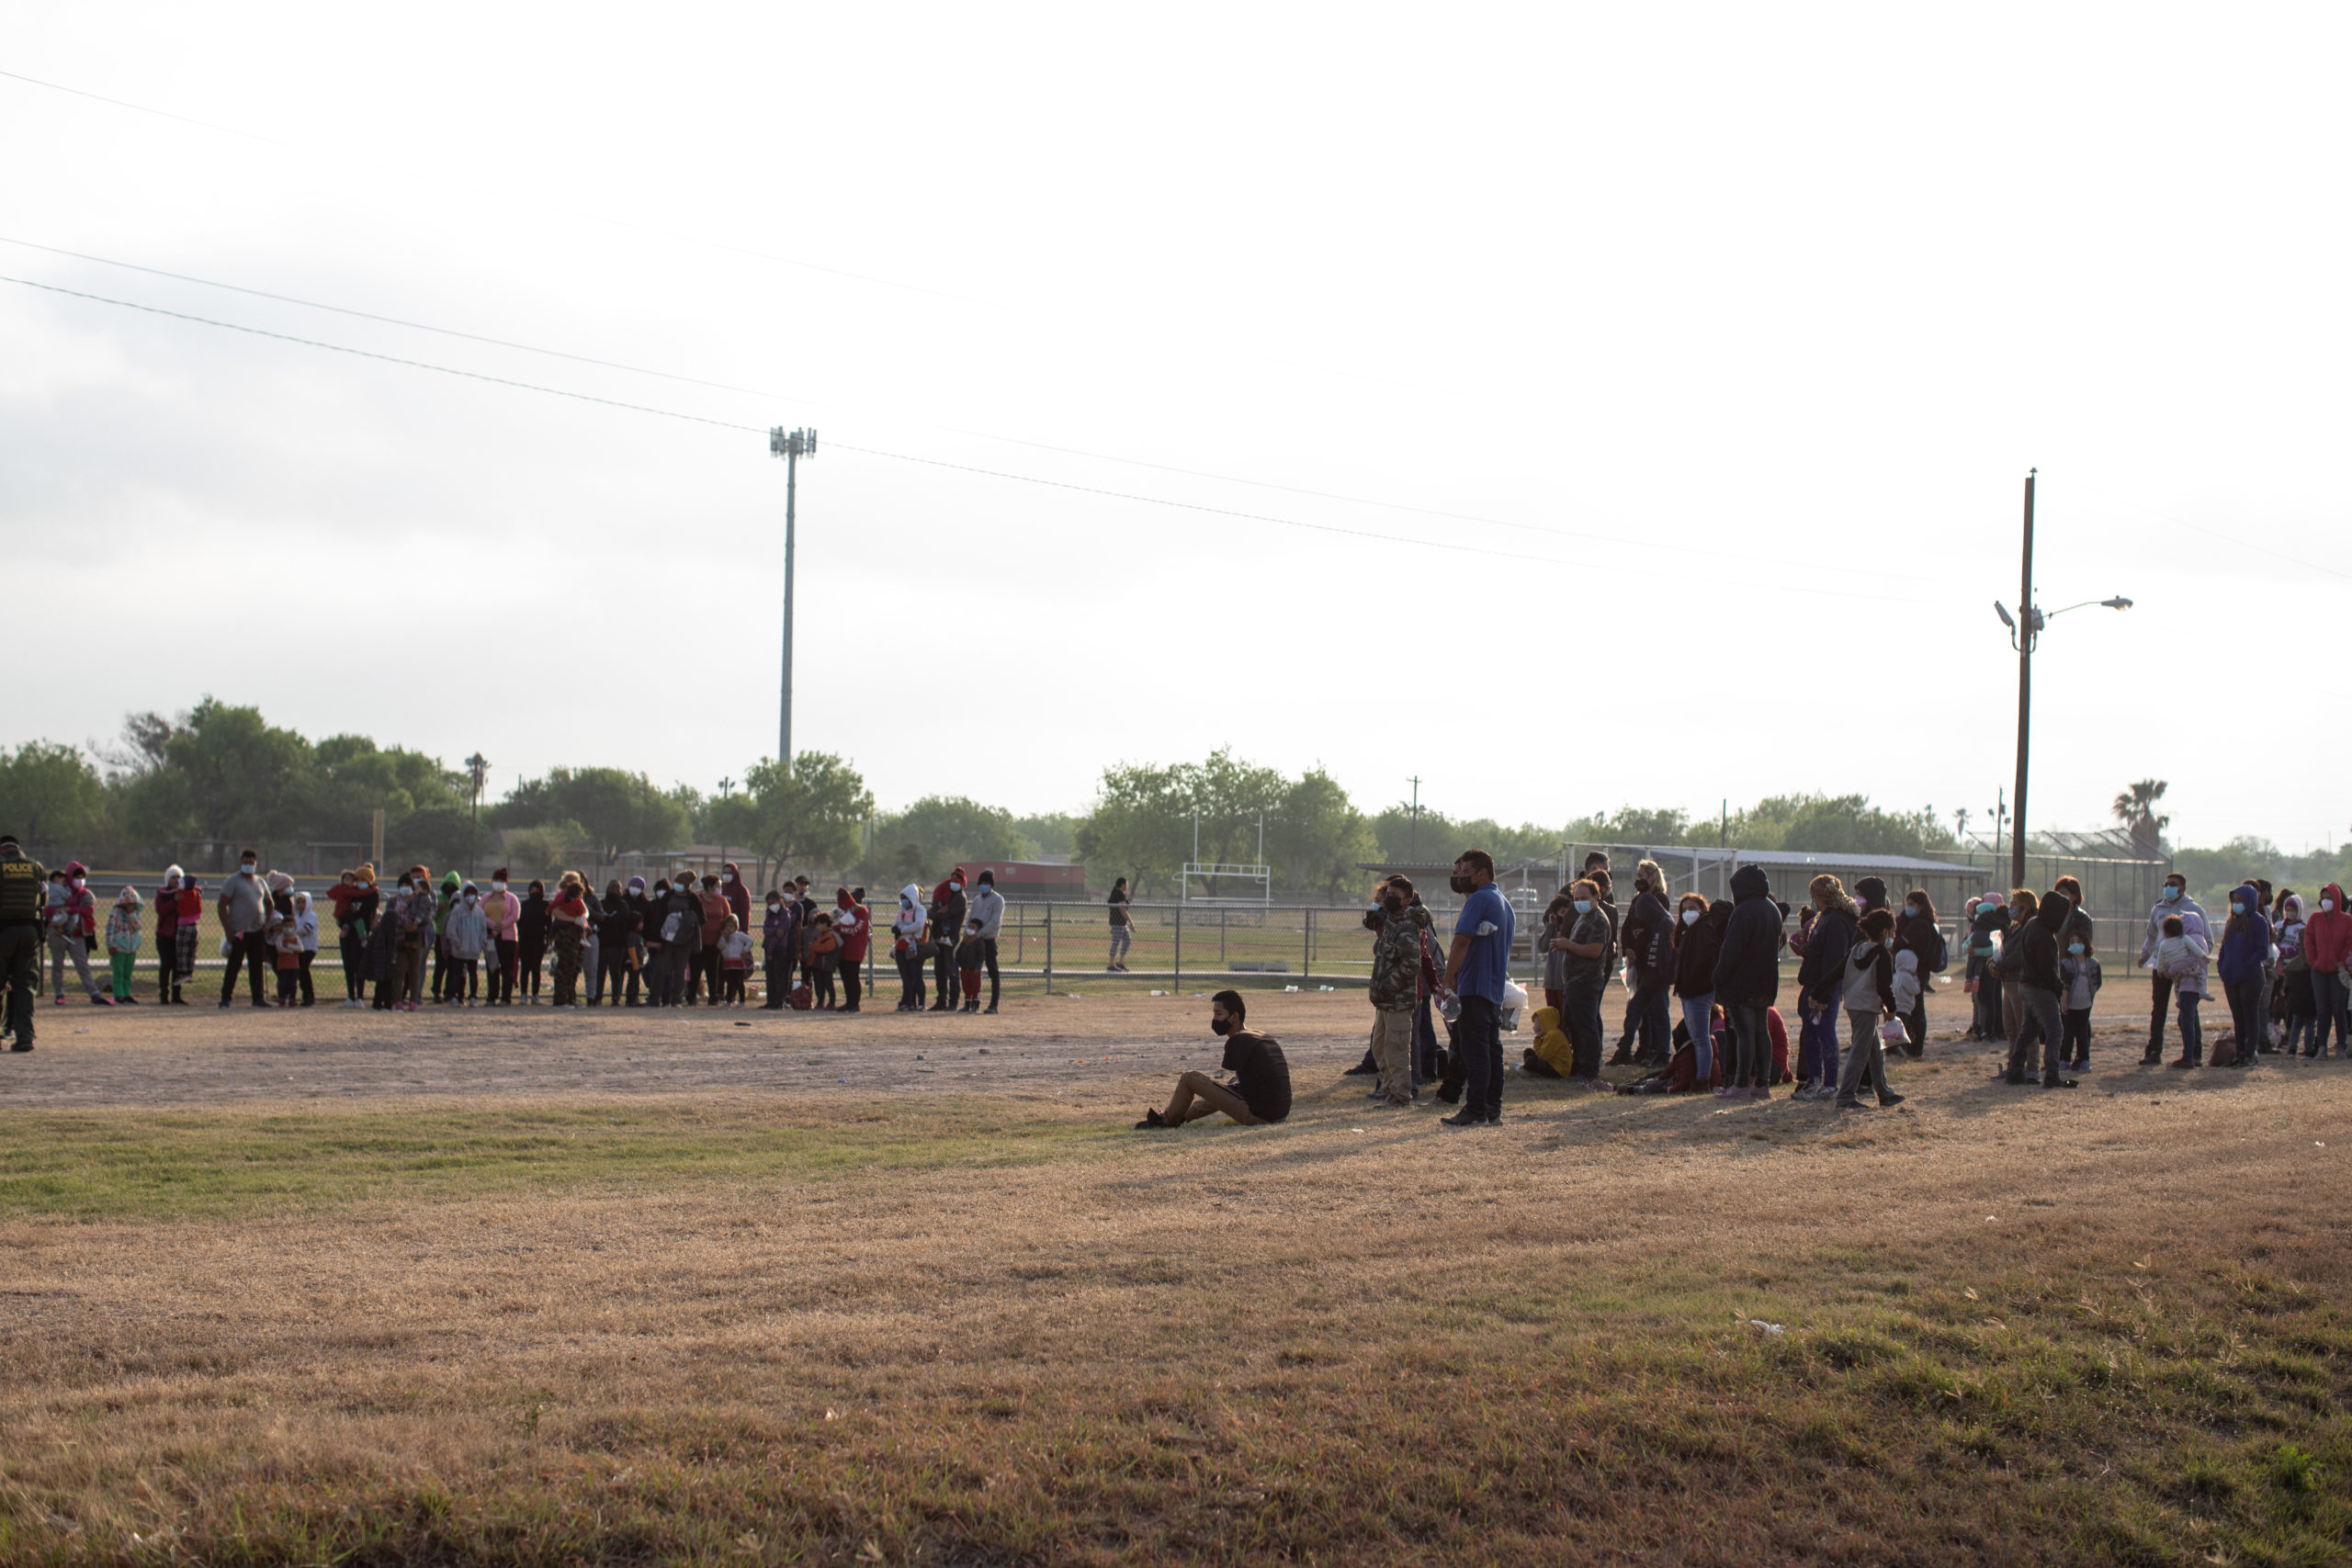 Illegal migrants wait on the side of a public road to be processed and taken to Customs and Border Protection facilities in La Joya, Texas on March 27, 2021. (Kaylee Greenlee - Daily Caller News Foundation)